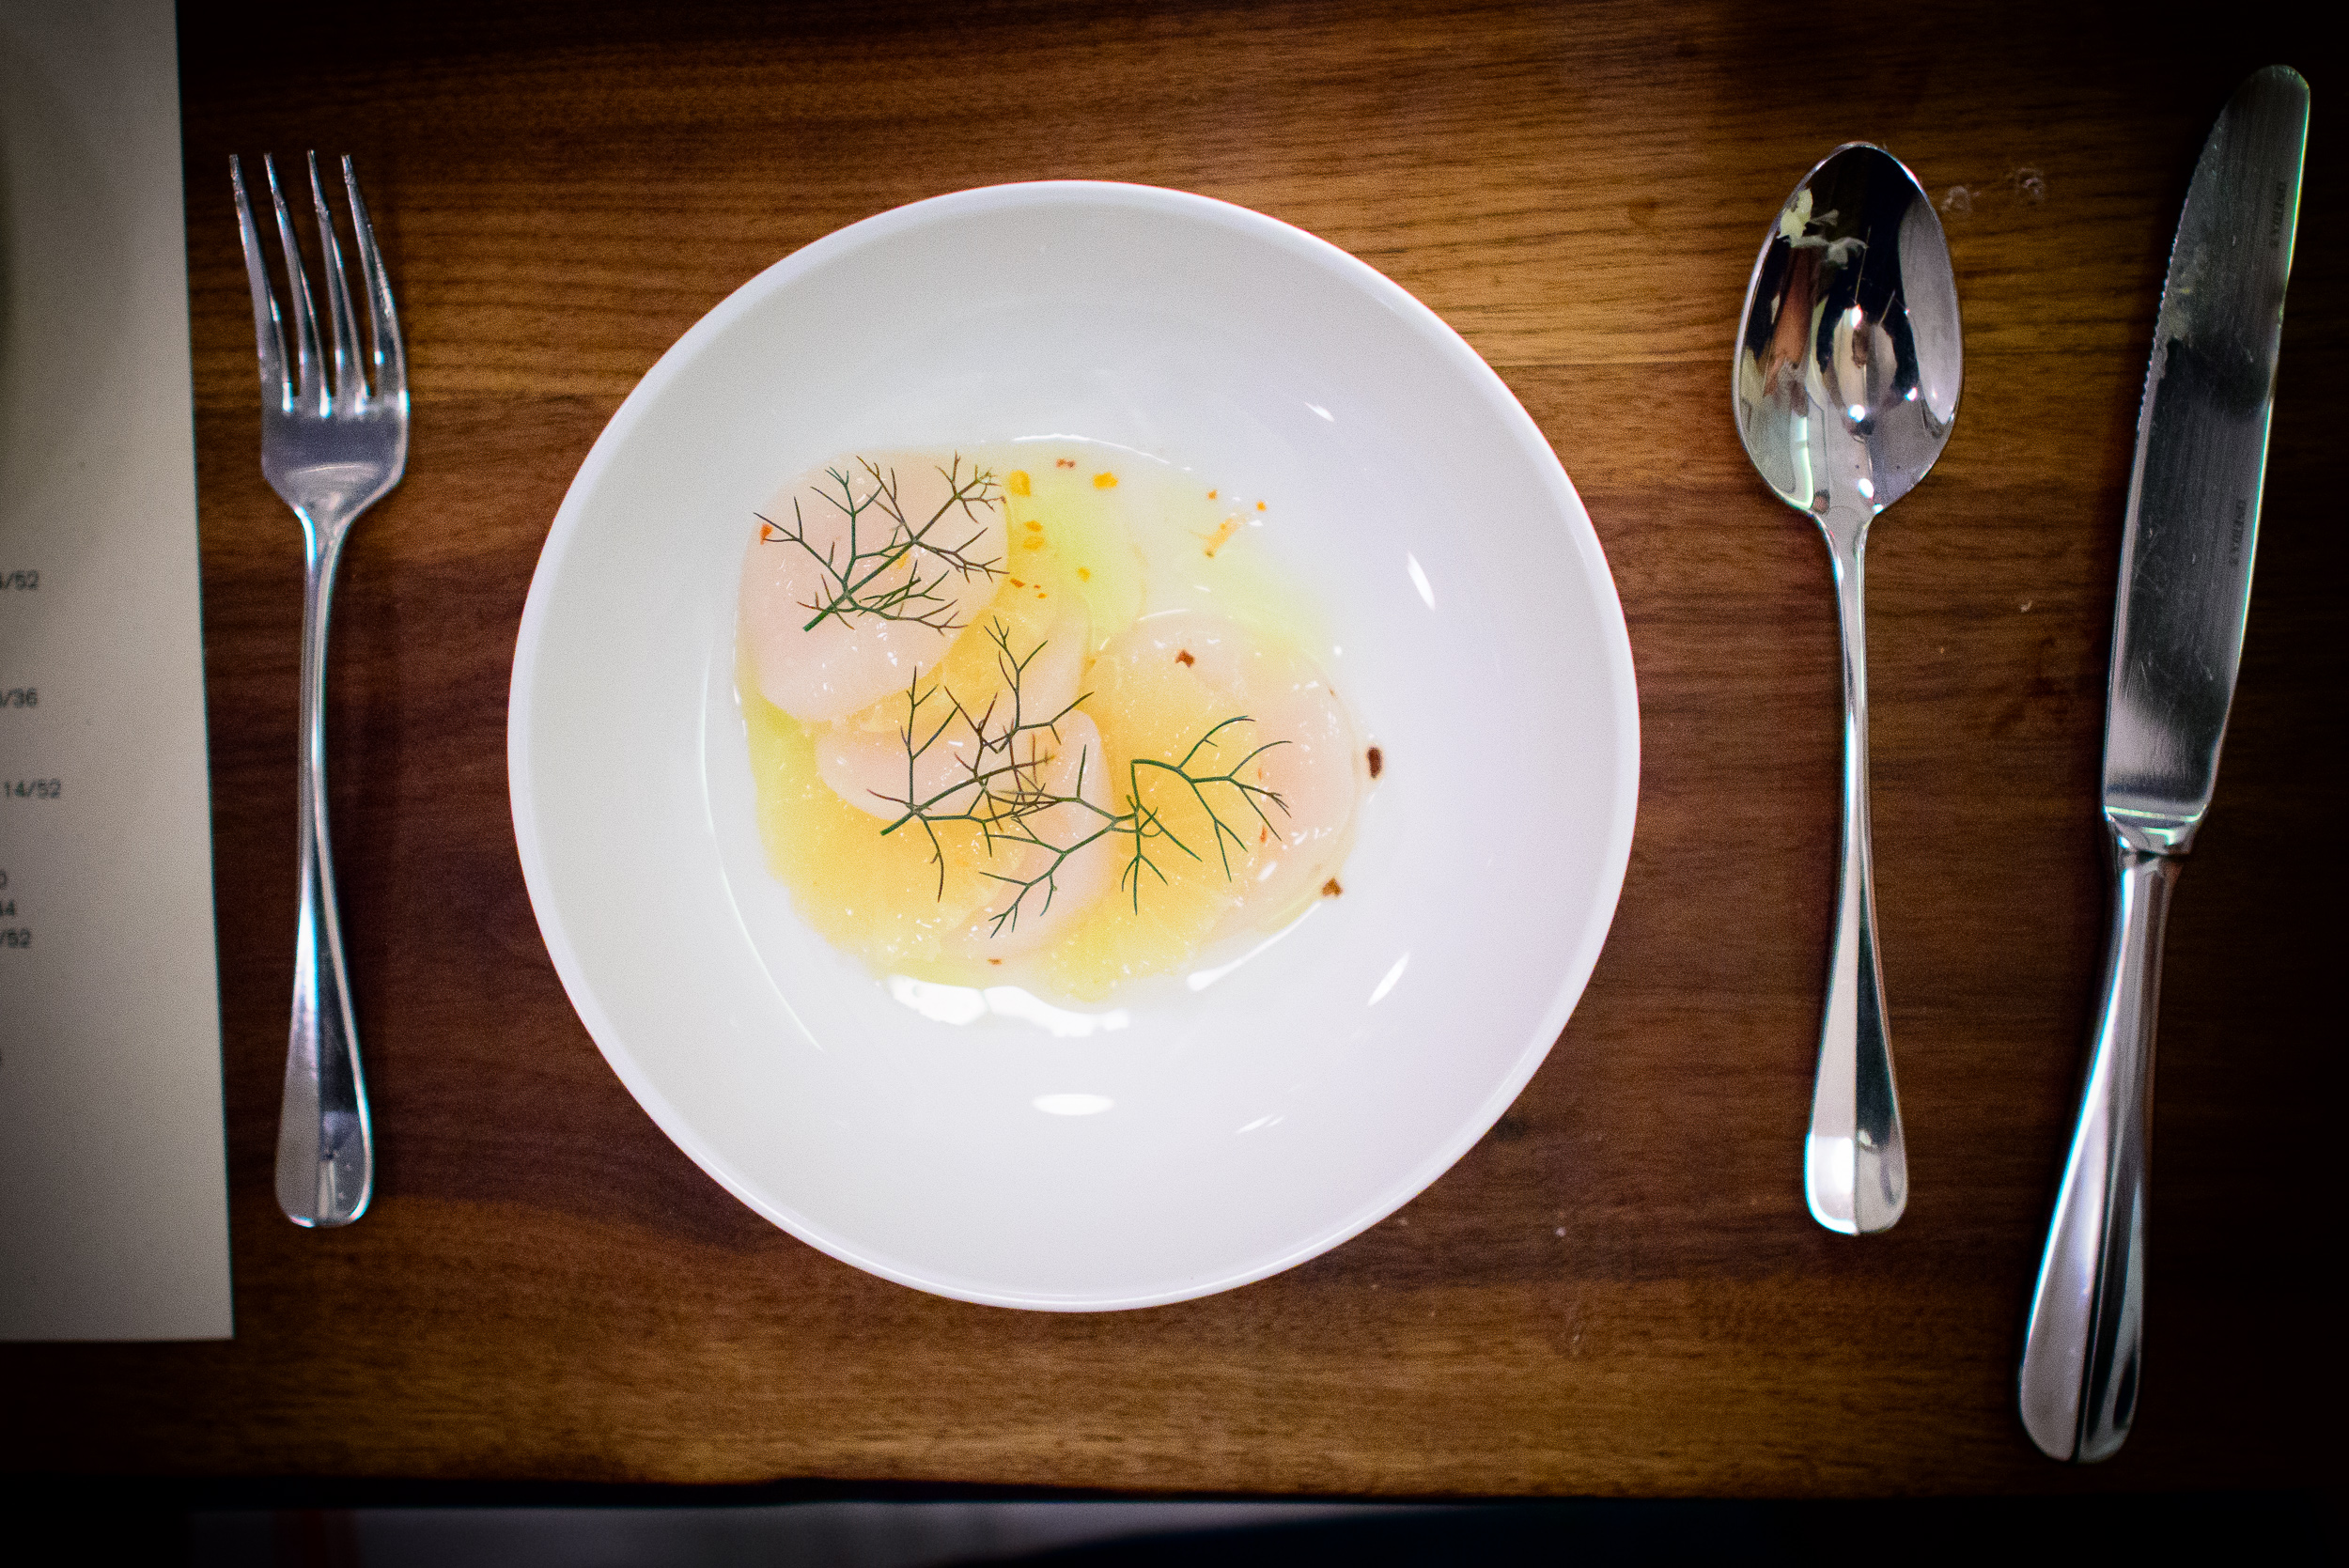 Raw scallops with citrus and bronze fennel ($16)